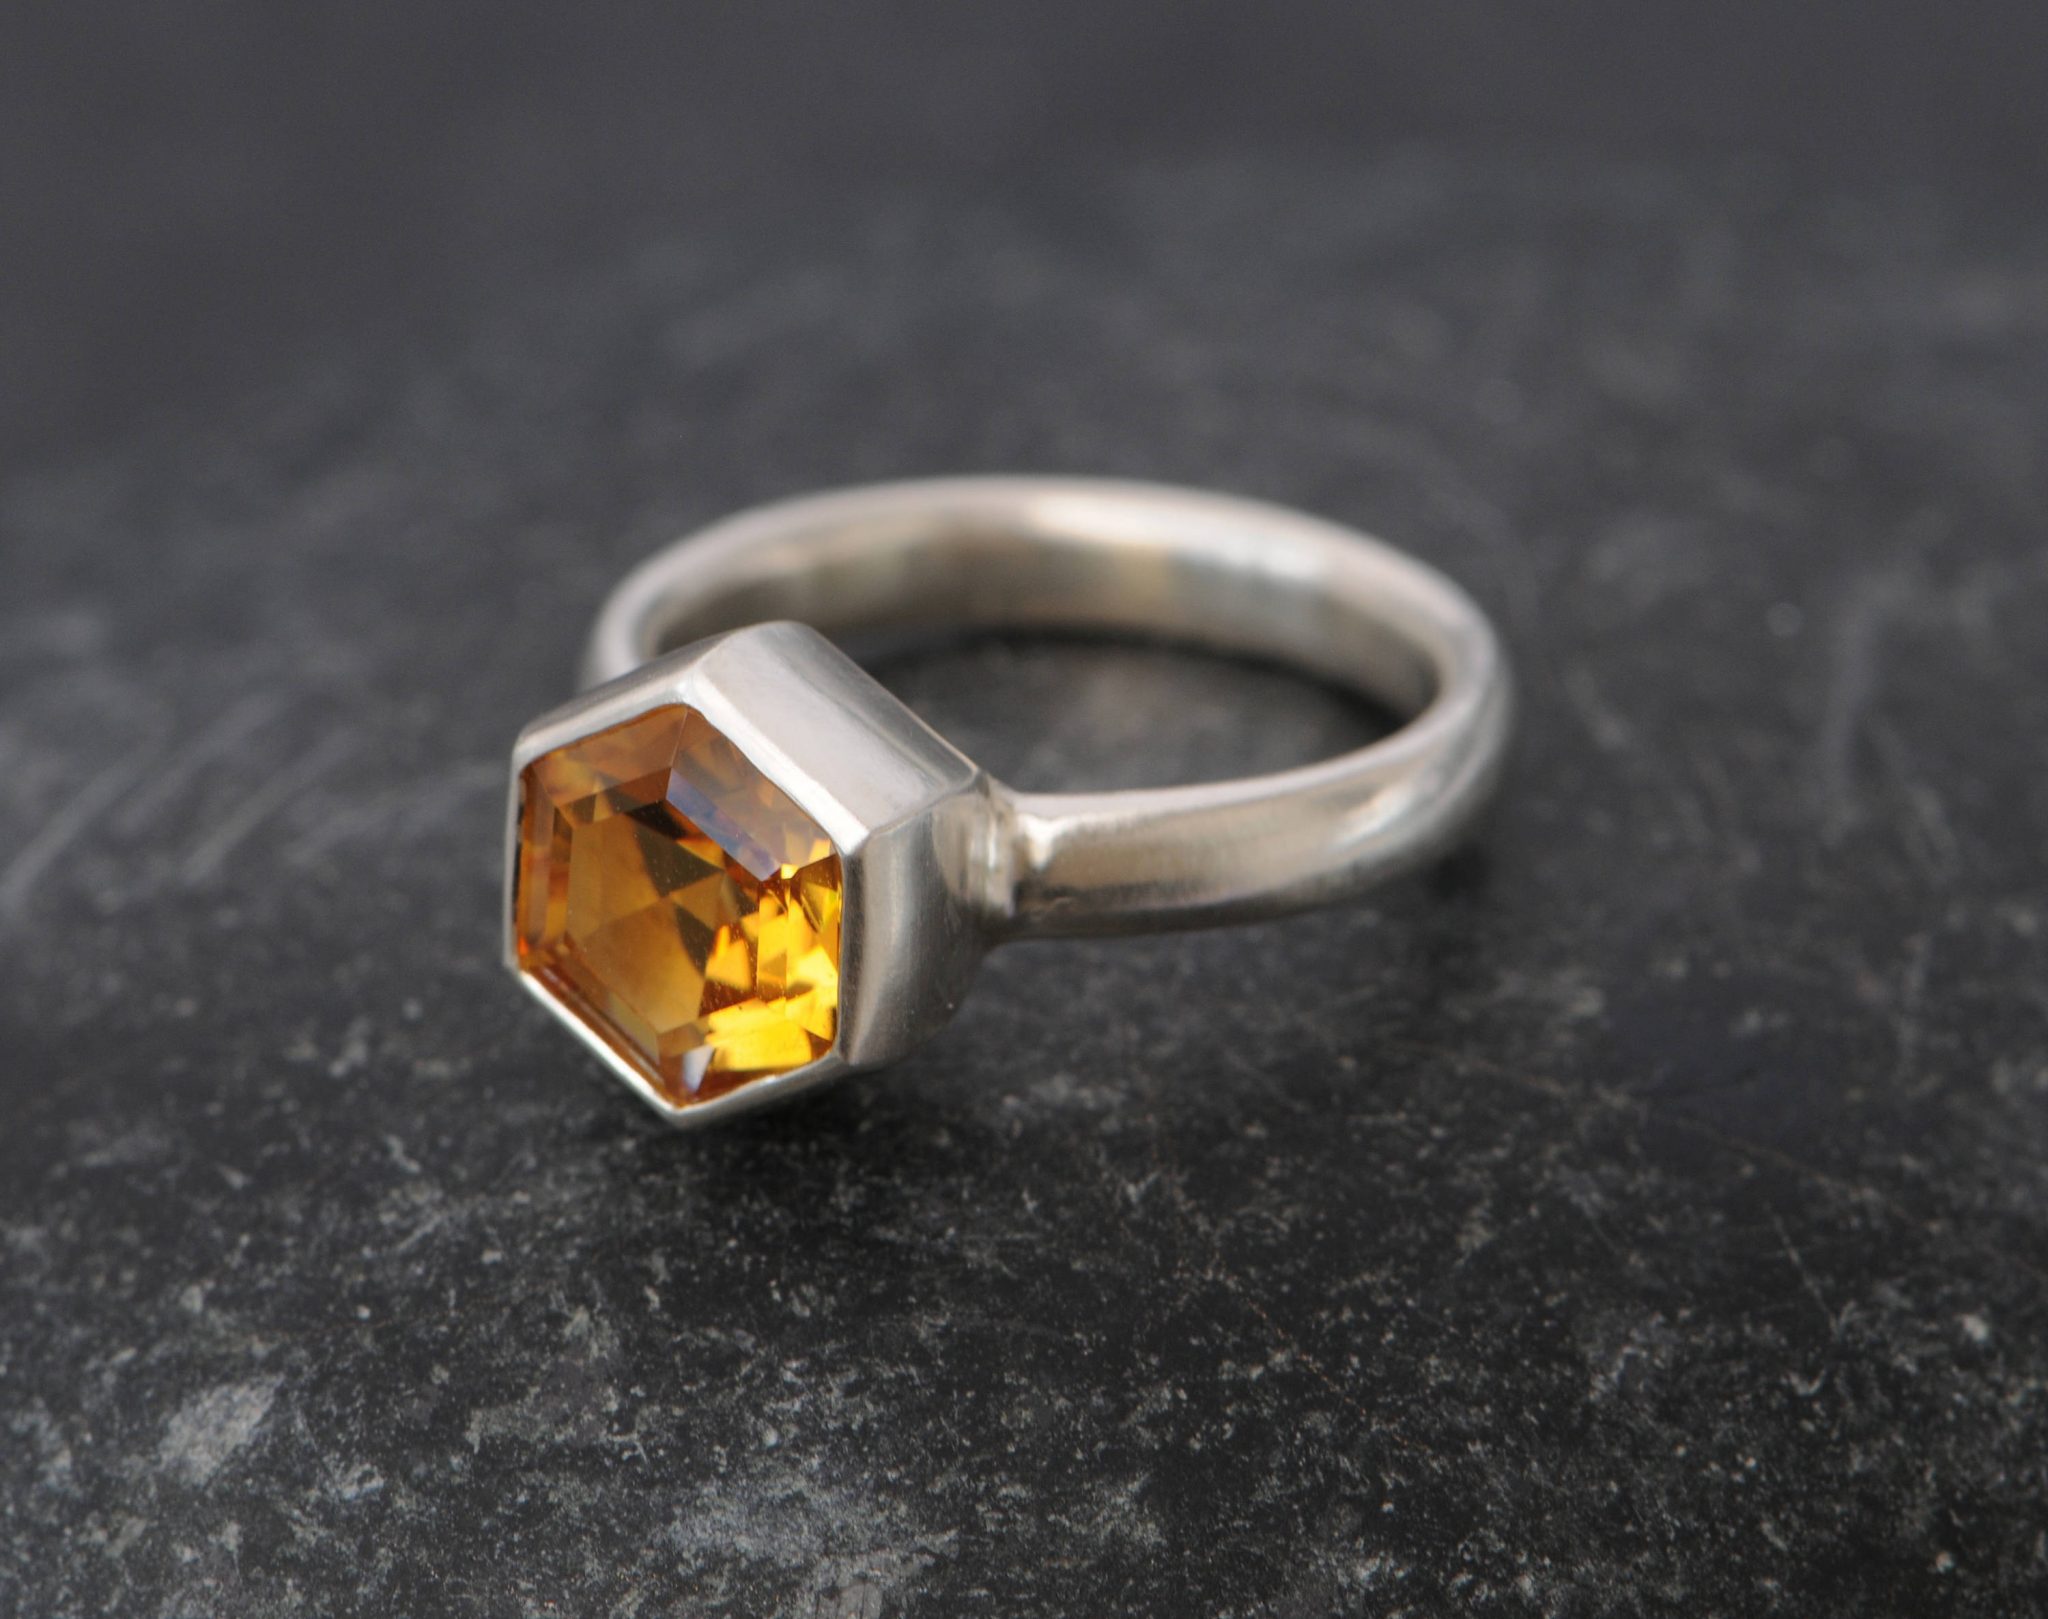 Unusual citrine hexagonal solitaire ring in silver